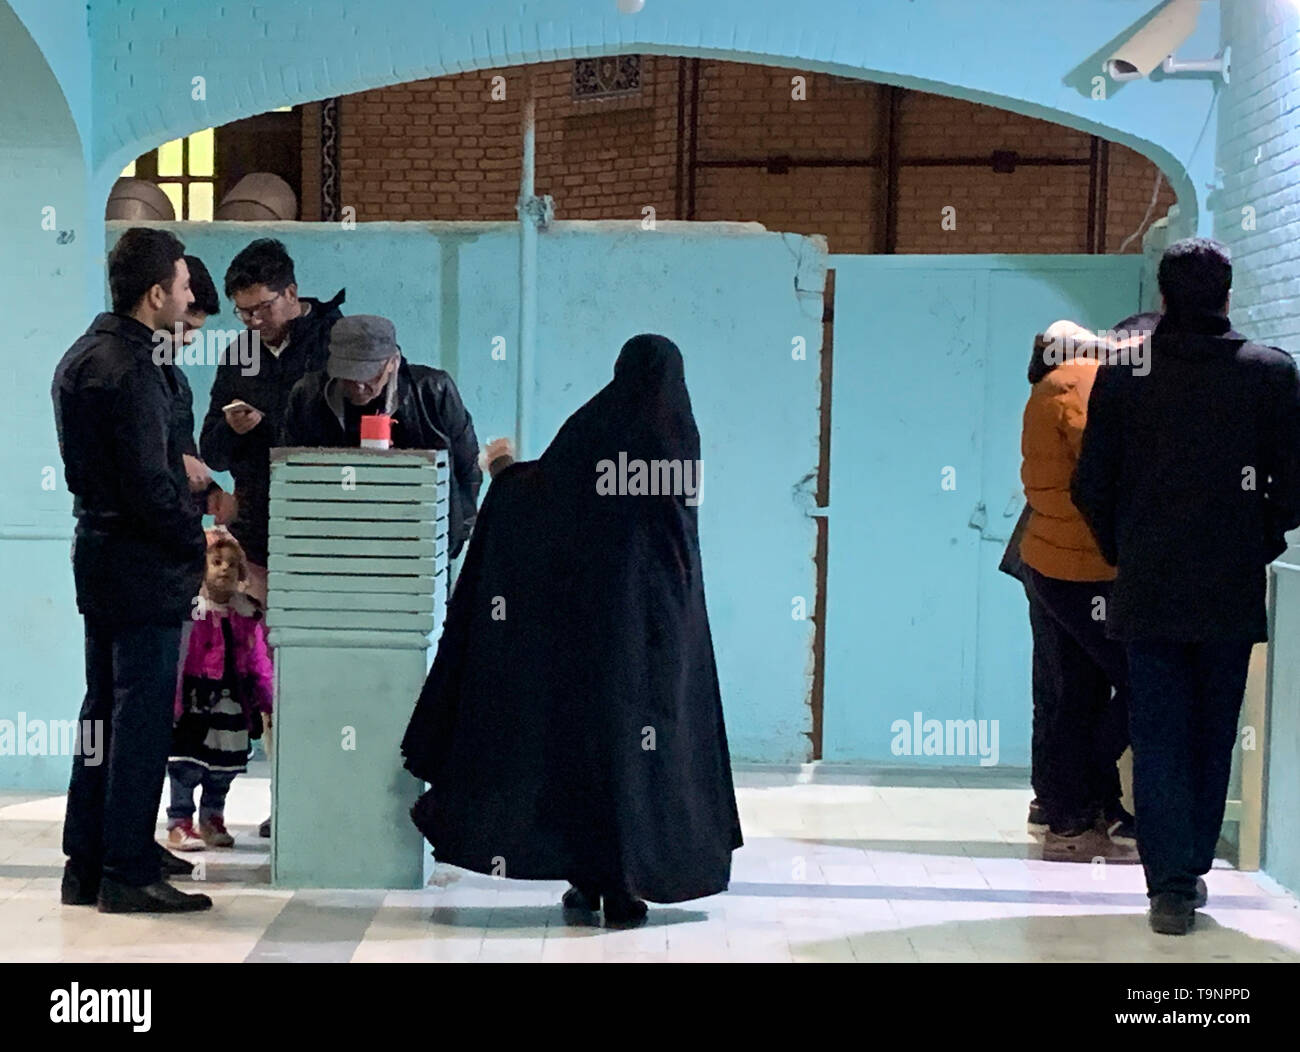 01 January 2019, Iran, Ghom: Iranian Muslims enter the Jamkaran Mosque. In the Jamkaran Mosque all wishes of the faithful are to be fulfilled. They can write down their wishes and throw them into a box. Through metaphysical channels, their wishes are then to be fulfilled. Especially seriously ill people in Iran see Jamkaran as their last hope for recovery. (to dpa 'Much shadow, little light - Iran's Islamic revolution turns 40' from 08.02.2019) Photo: Farshid Motahari/dpa | usage worldwide Stock Photo